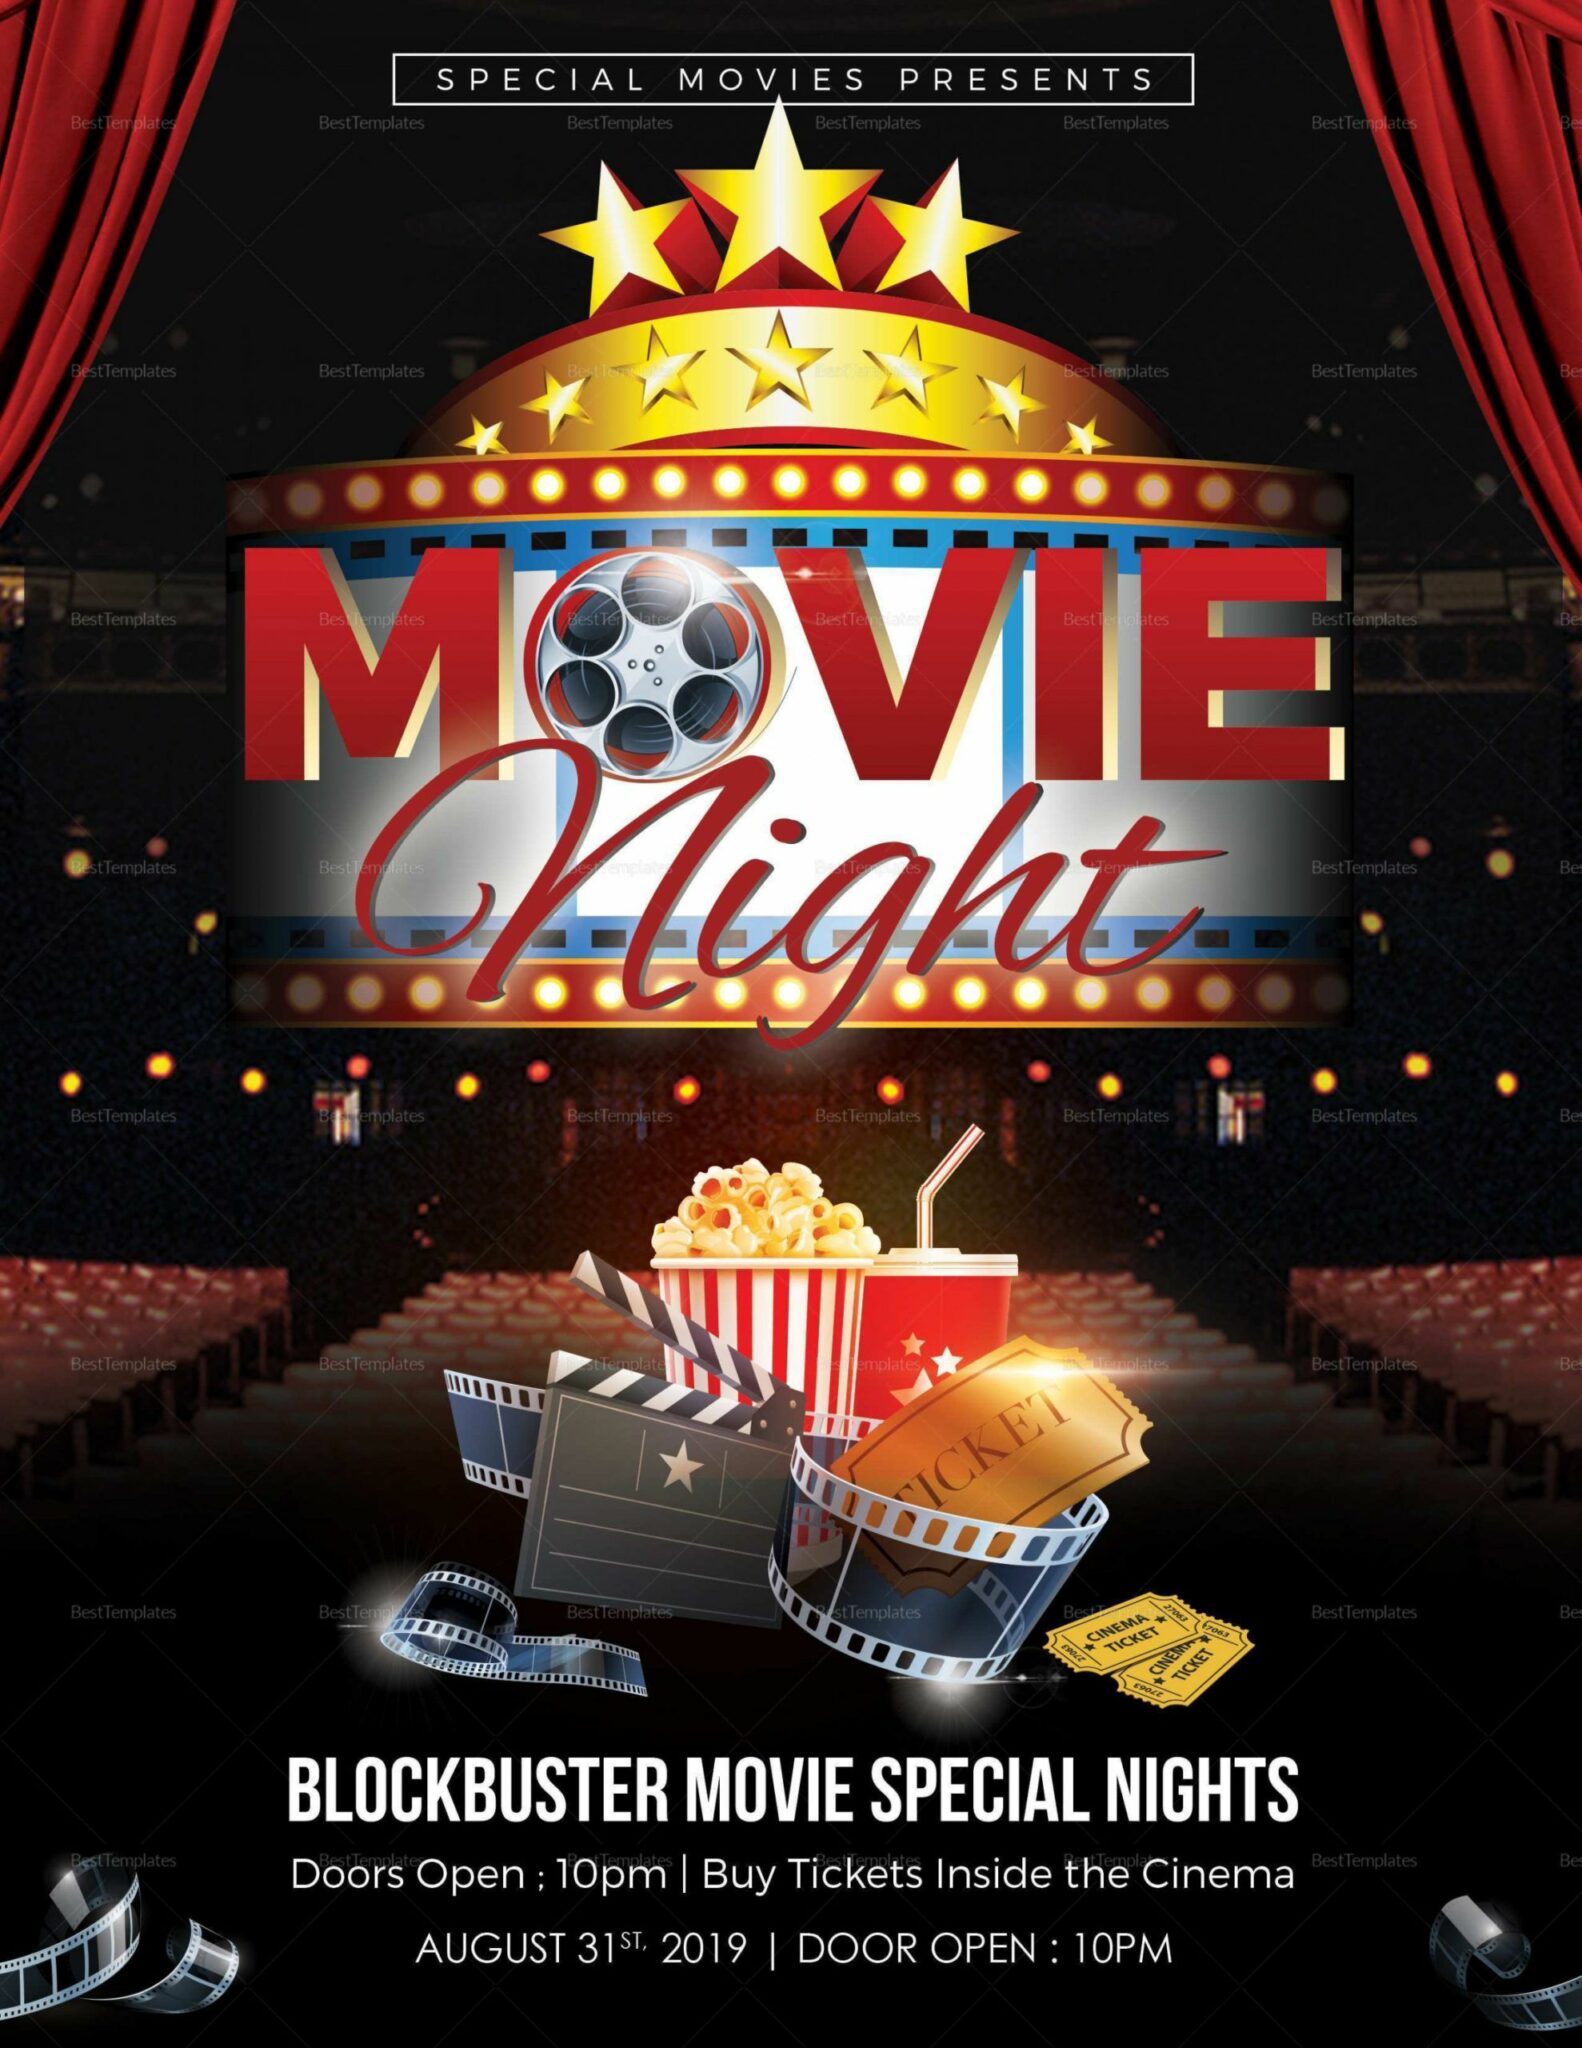 Free 32 Visiting Family Movie Night Flyer Template Photo By Church ...